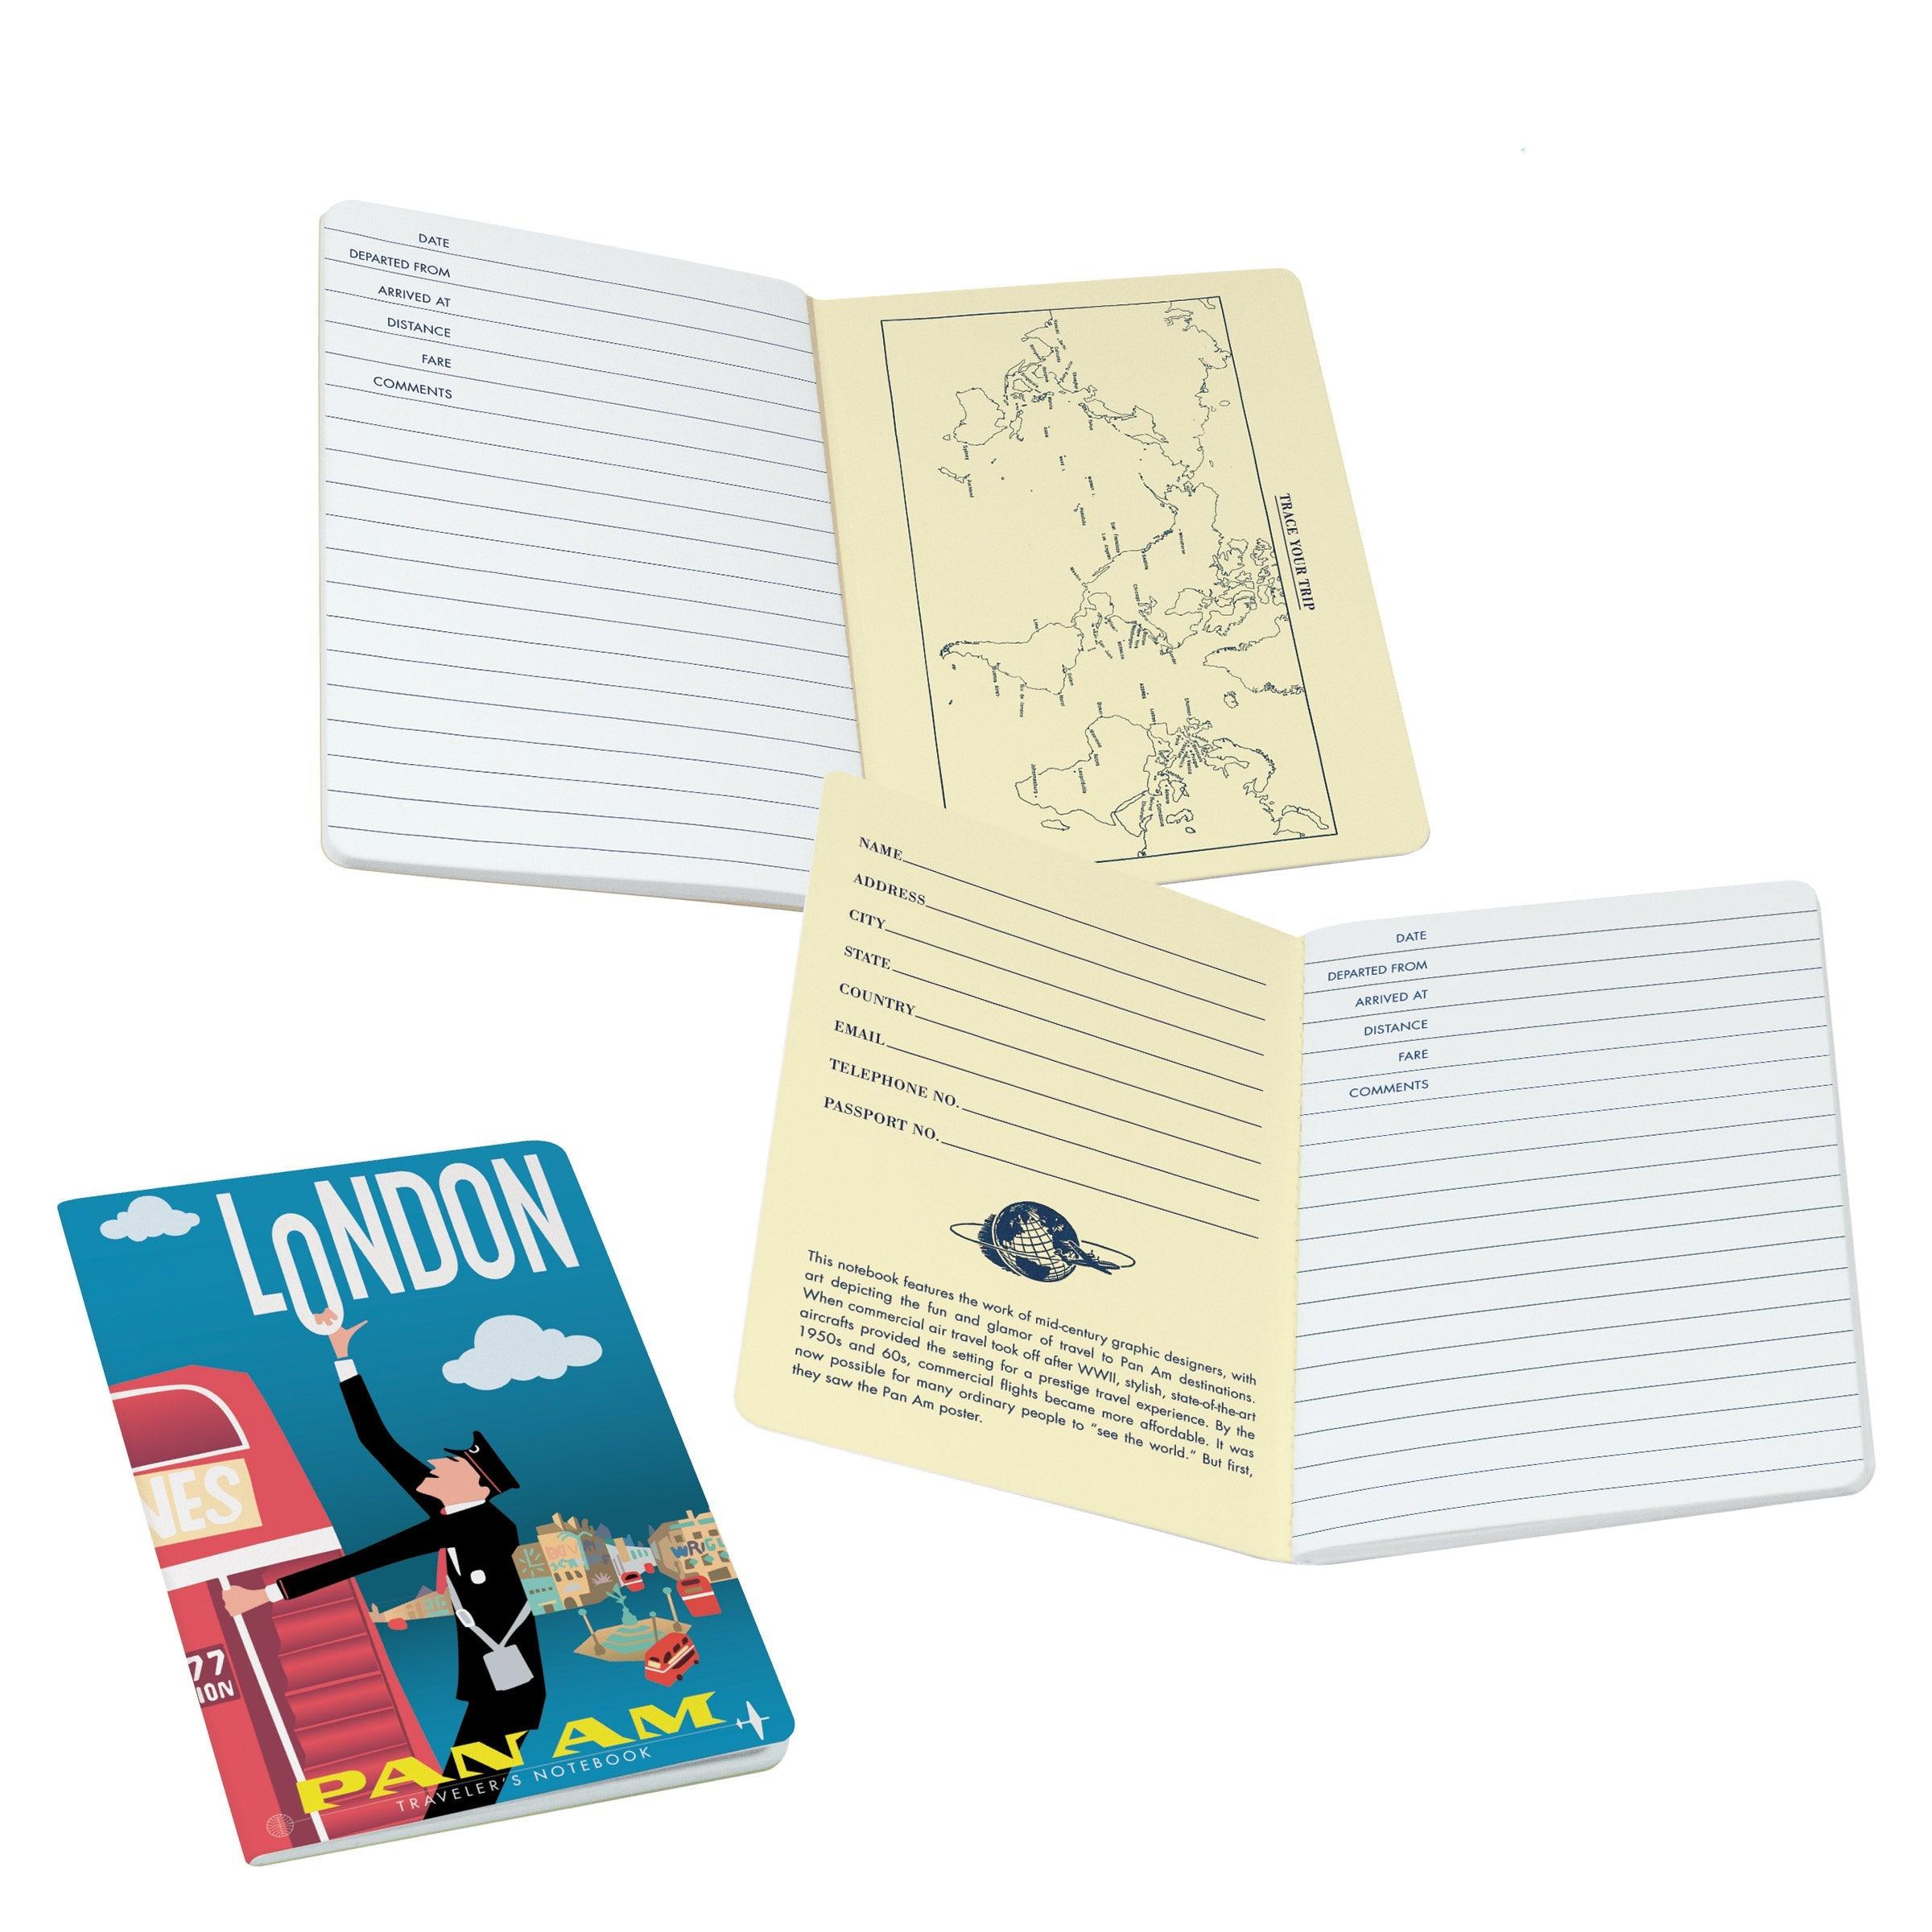 Product photo of Pan Am London Notebook, a novelty gift manufactured by The Unemployed Philosophers Guild.